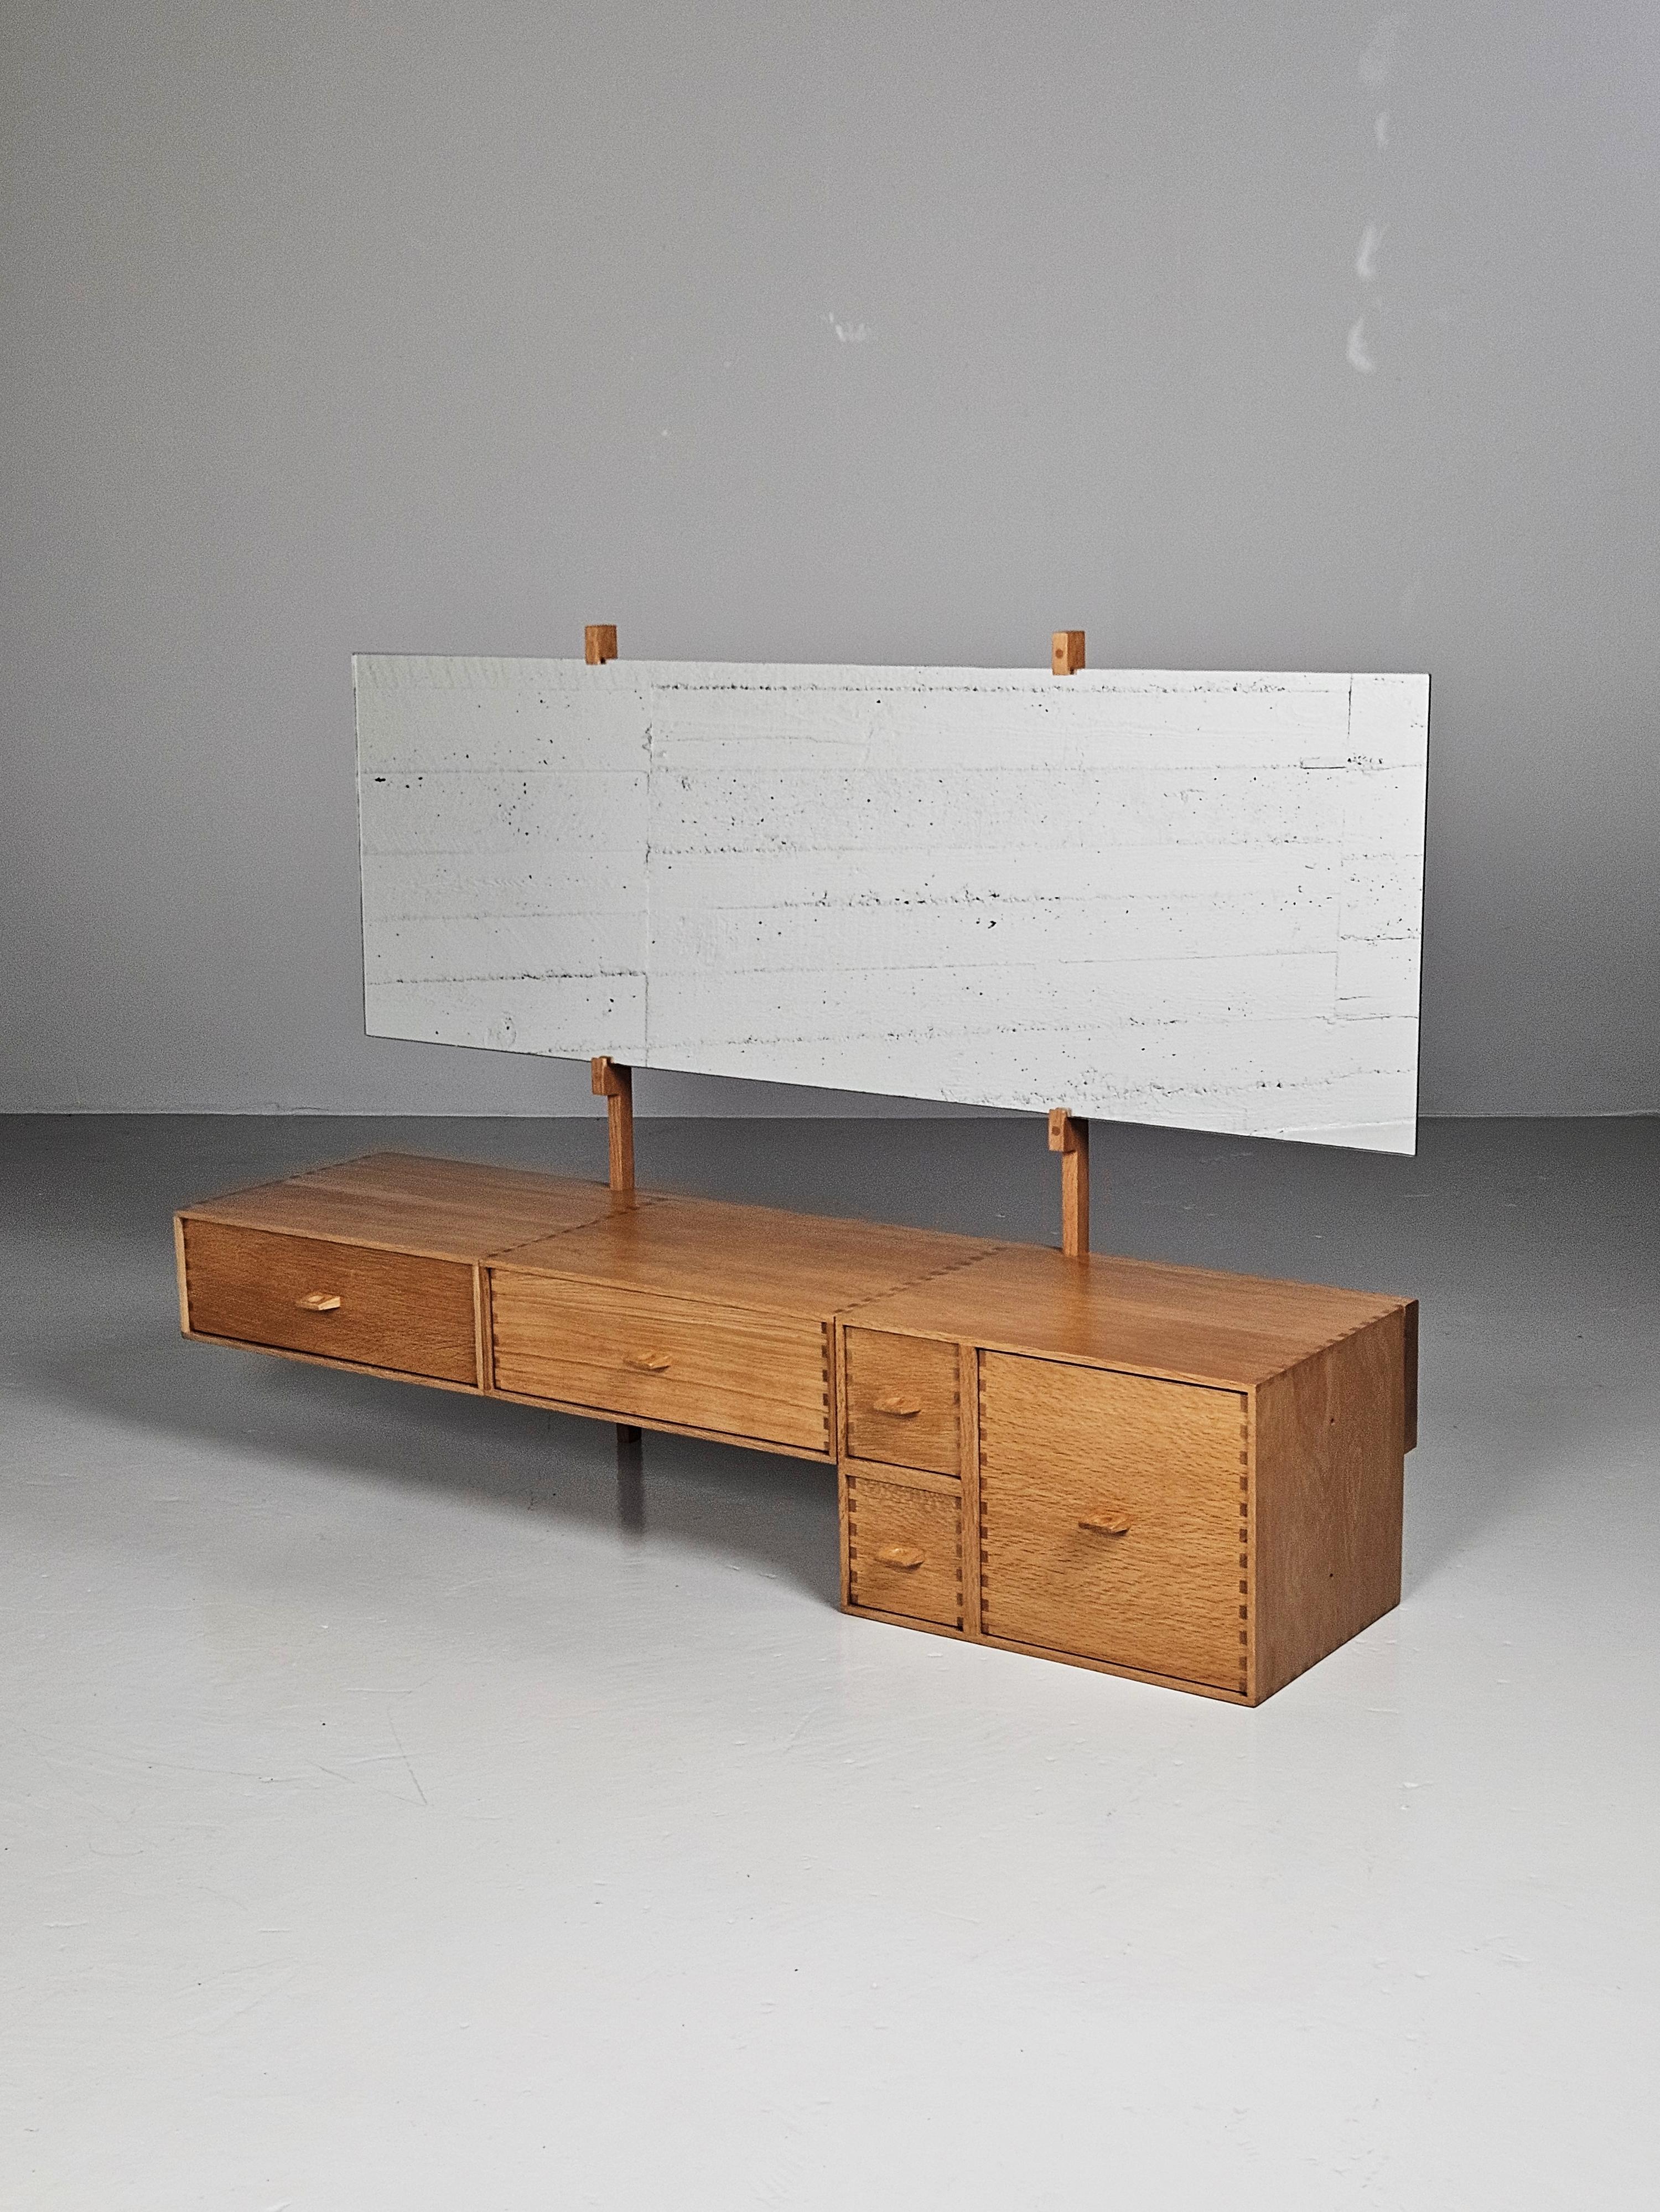 Beautiful Midcentury modern wall dressing table by Uno and Östen Kristiansson produced by Luxus Vittsjö, Sweden, during the 1960s. Made in oak with great details in the joinery, sculpted handles on the drawers.